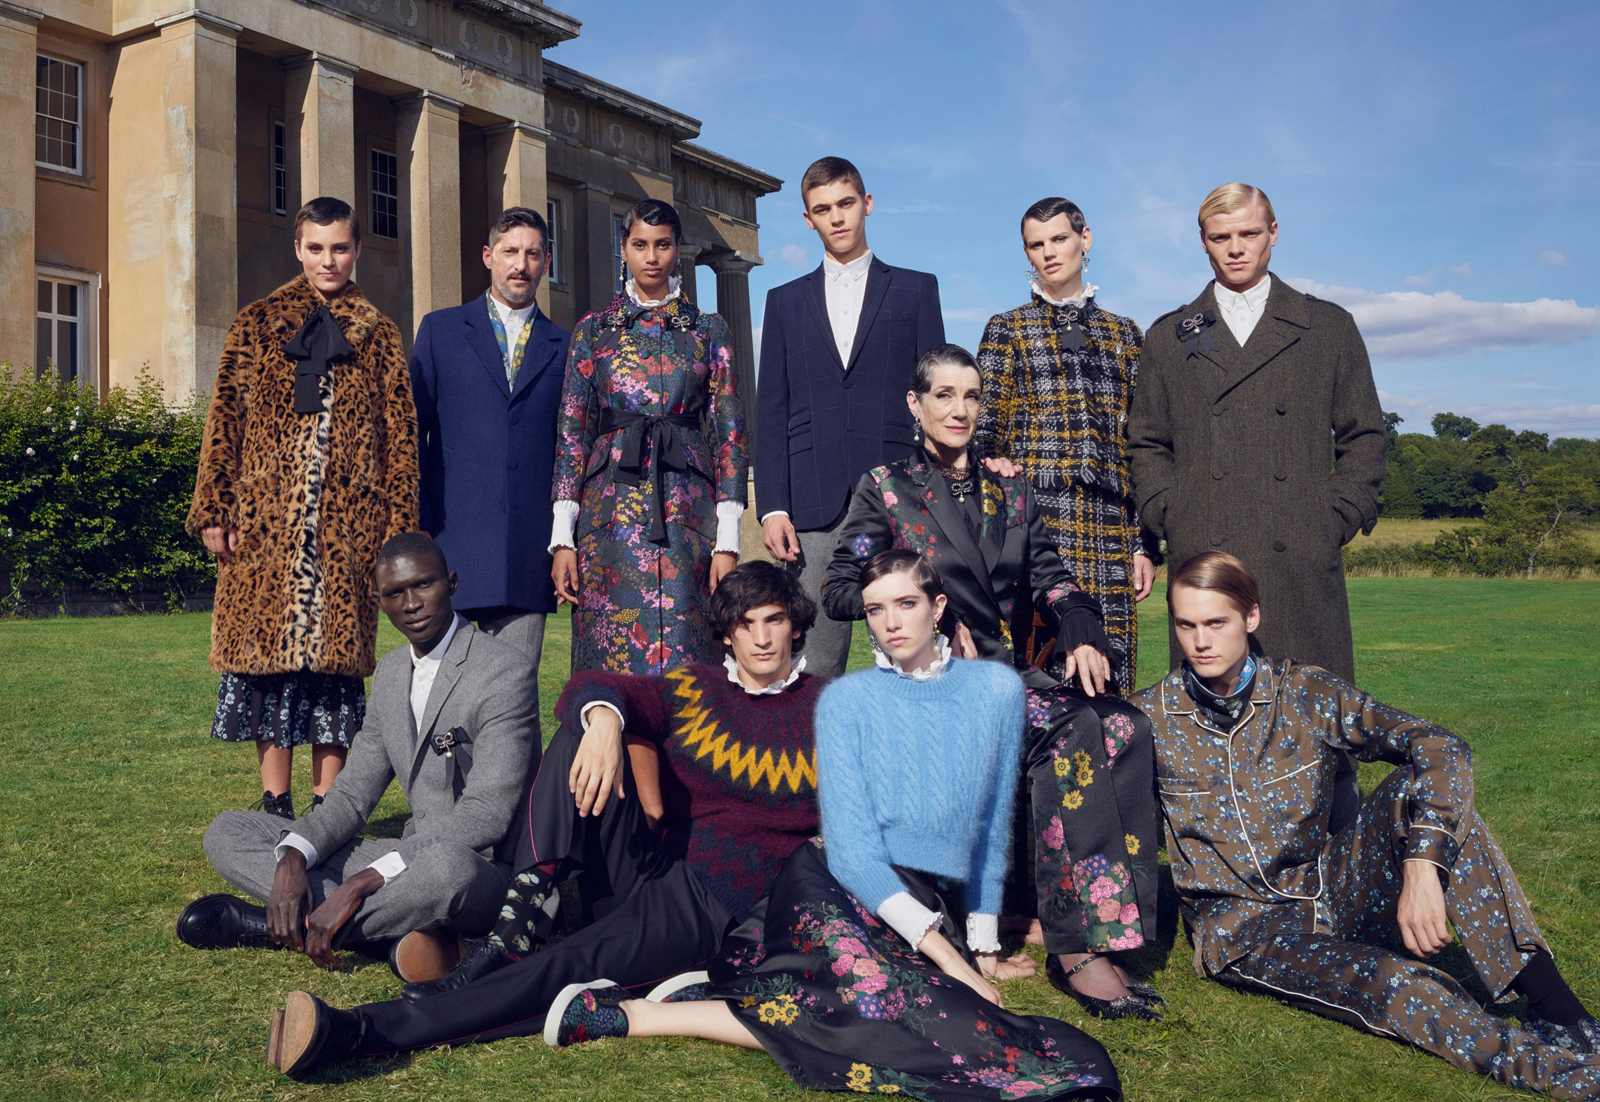 Family Portraits ERDEM x H&M by Photographer Michal Pudelka